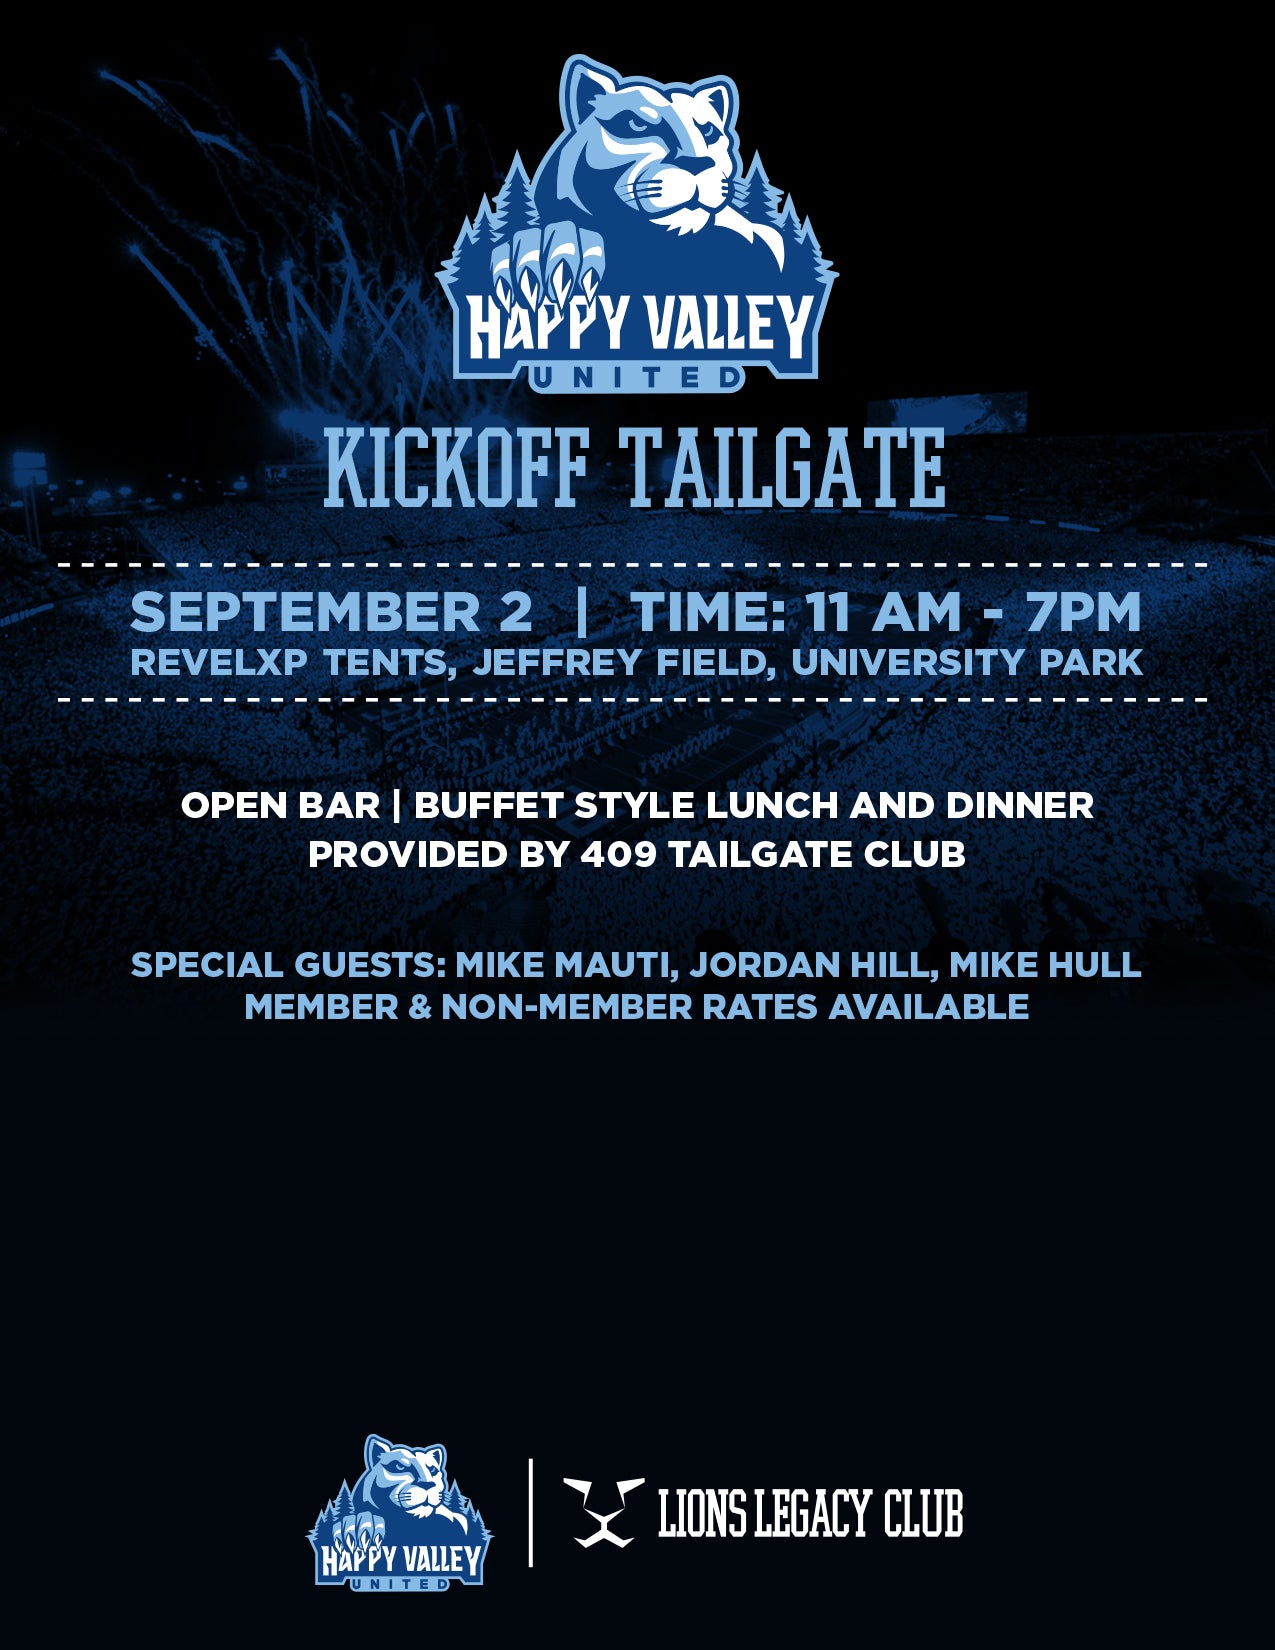 Happy Valley United Kickoff Tailgate - Members